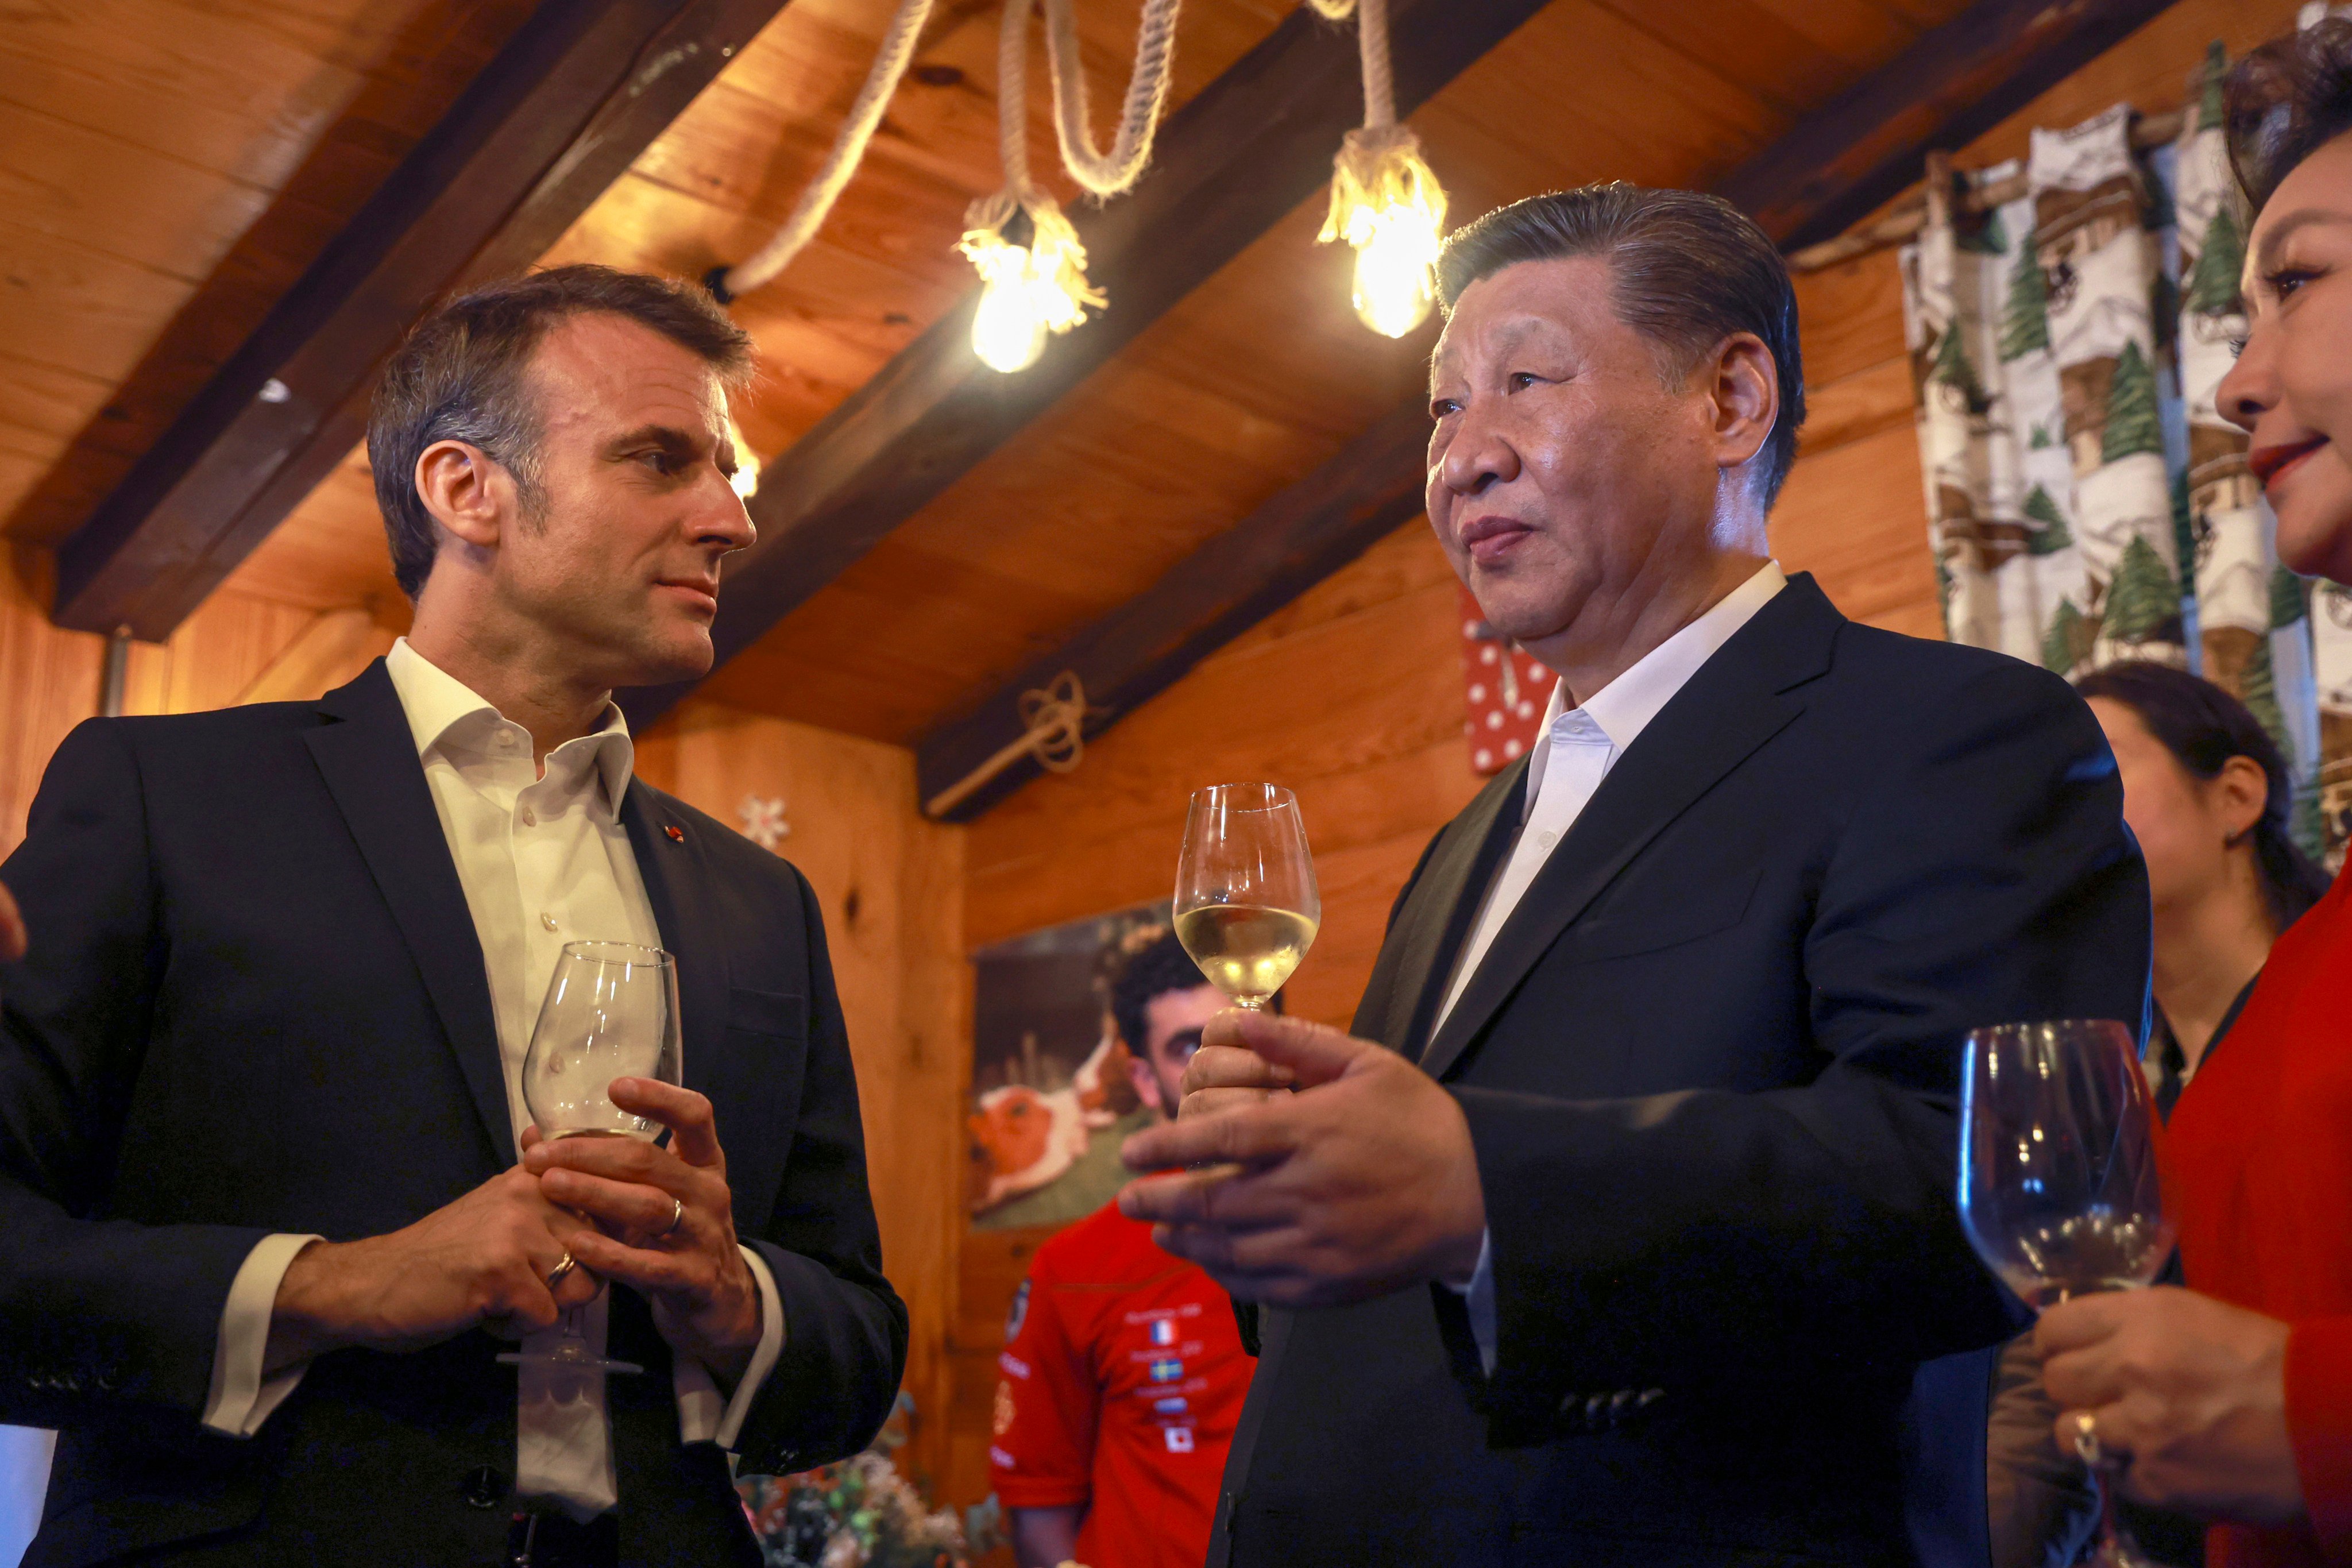 Chinese President Xi Jinping with his host and counterpart Emmanuel Macron at a restaurant in the Pyrenees mountains on Tuesday. Photo: AP